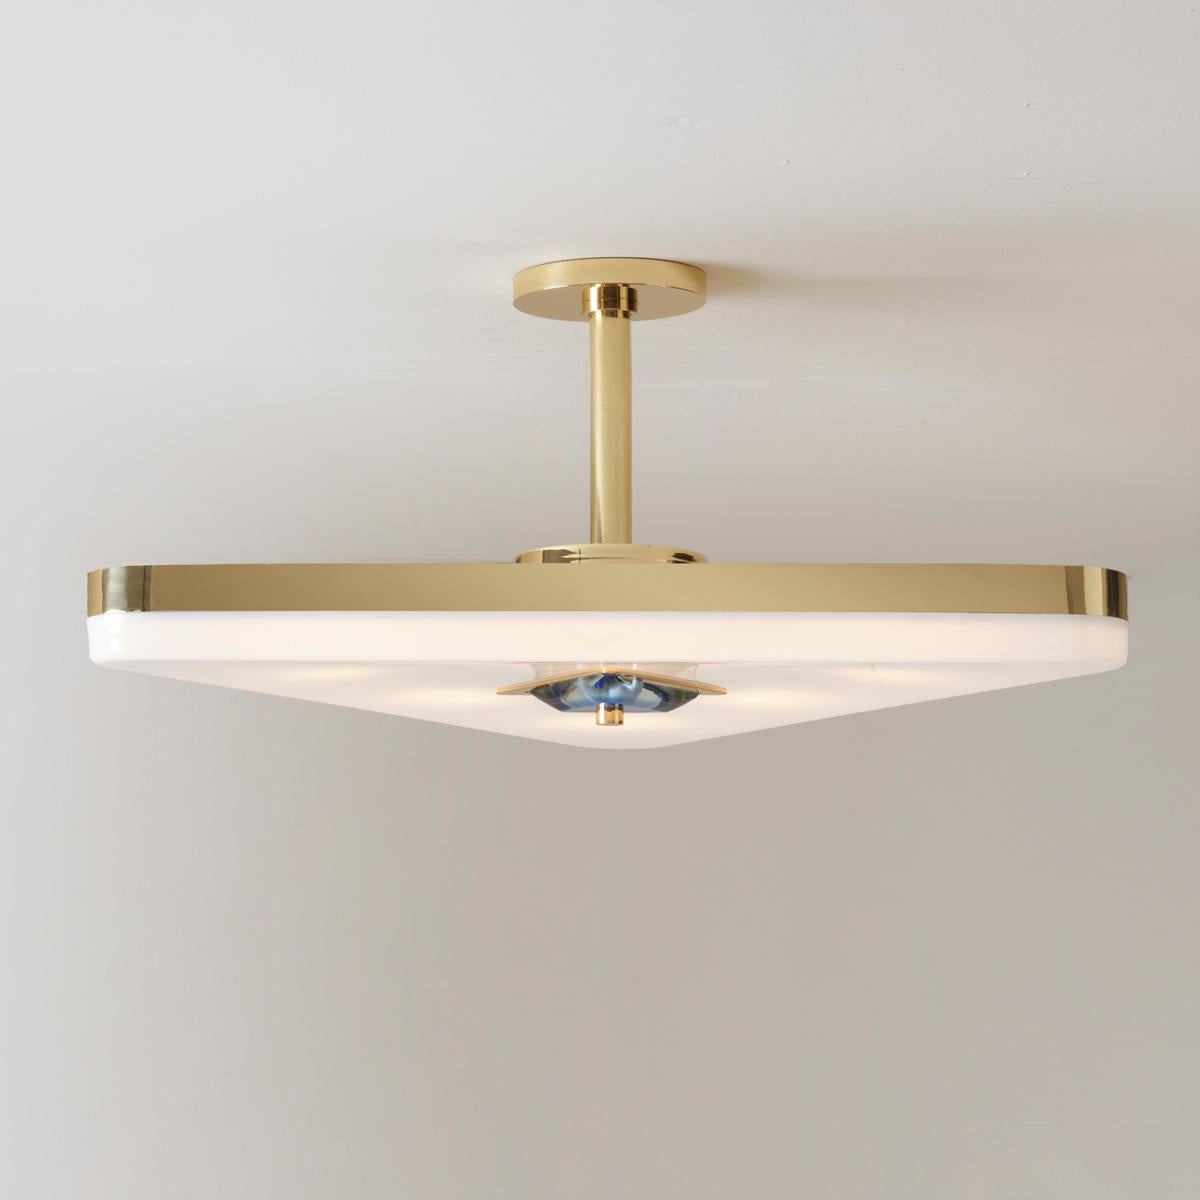 Iris Triangle Ceiling Light by Gaspare Asaro. Bronze Finish In New Condition For Sale In New York, NY